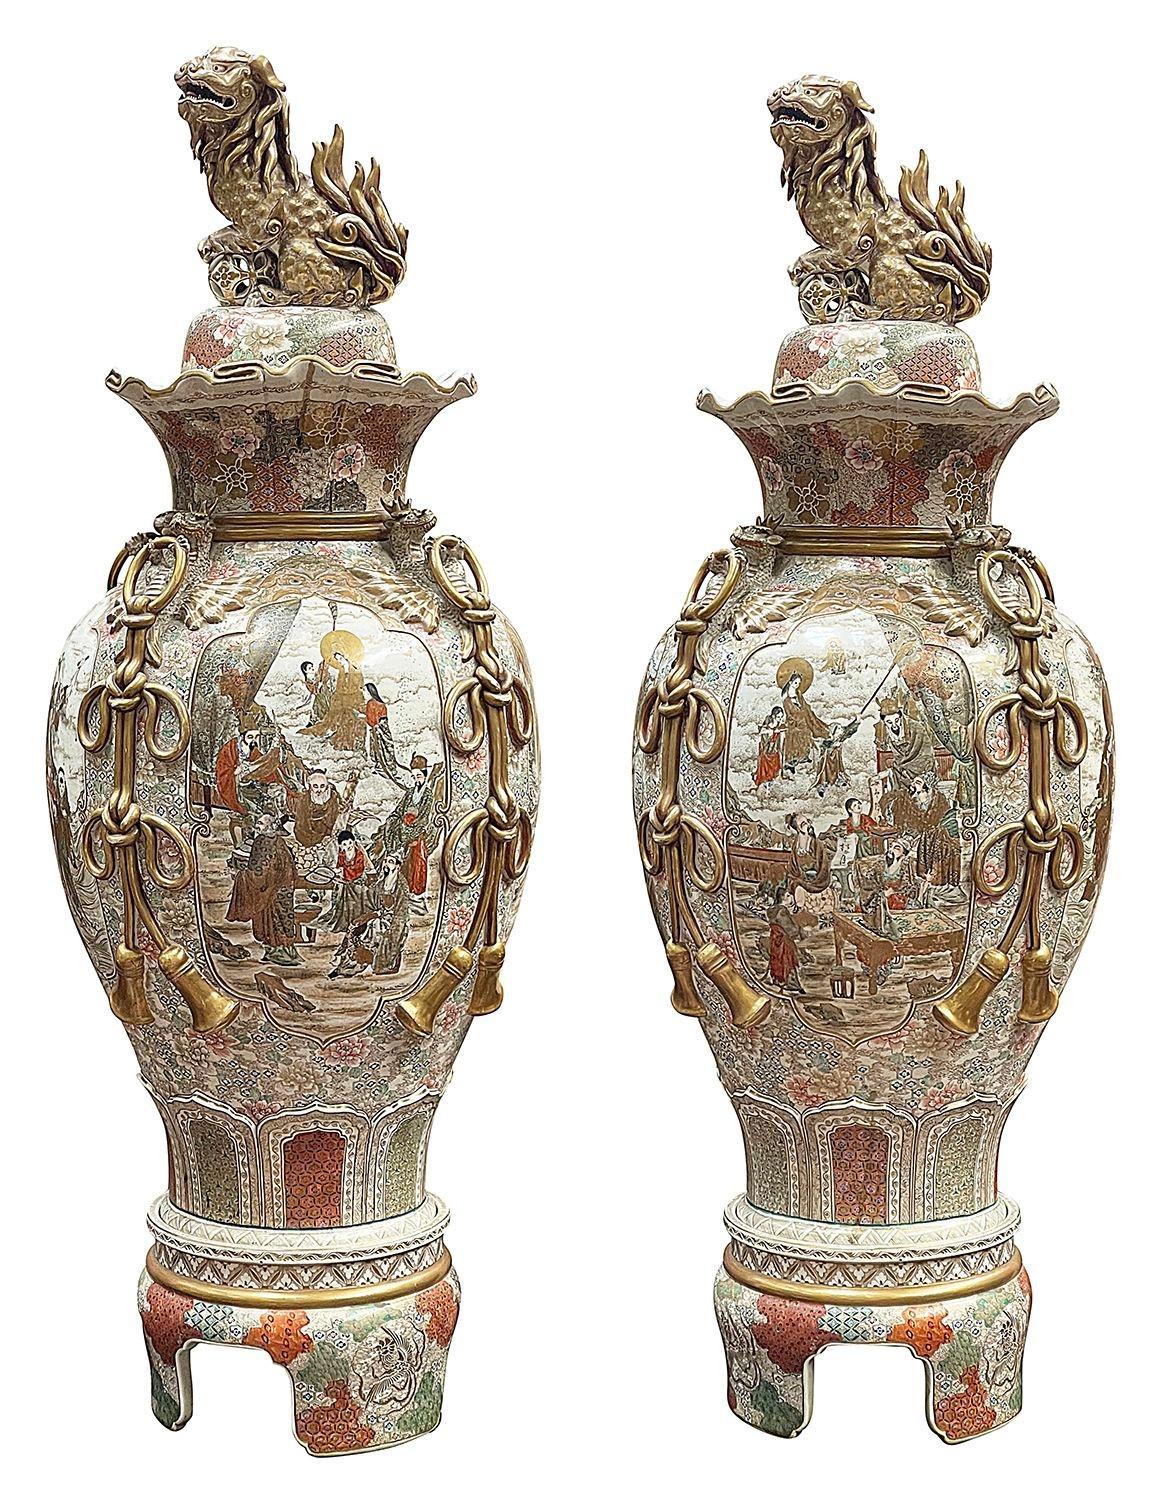 A spectacular pair of late 19th Century Japanese Meiji period  (1868-1912) Satsuma lidded vases. Each with wonderful Foo Dog finials to the lids, classical orange and gilded motif decoration with inset hand painted panels depicting, families,